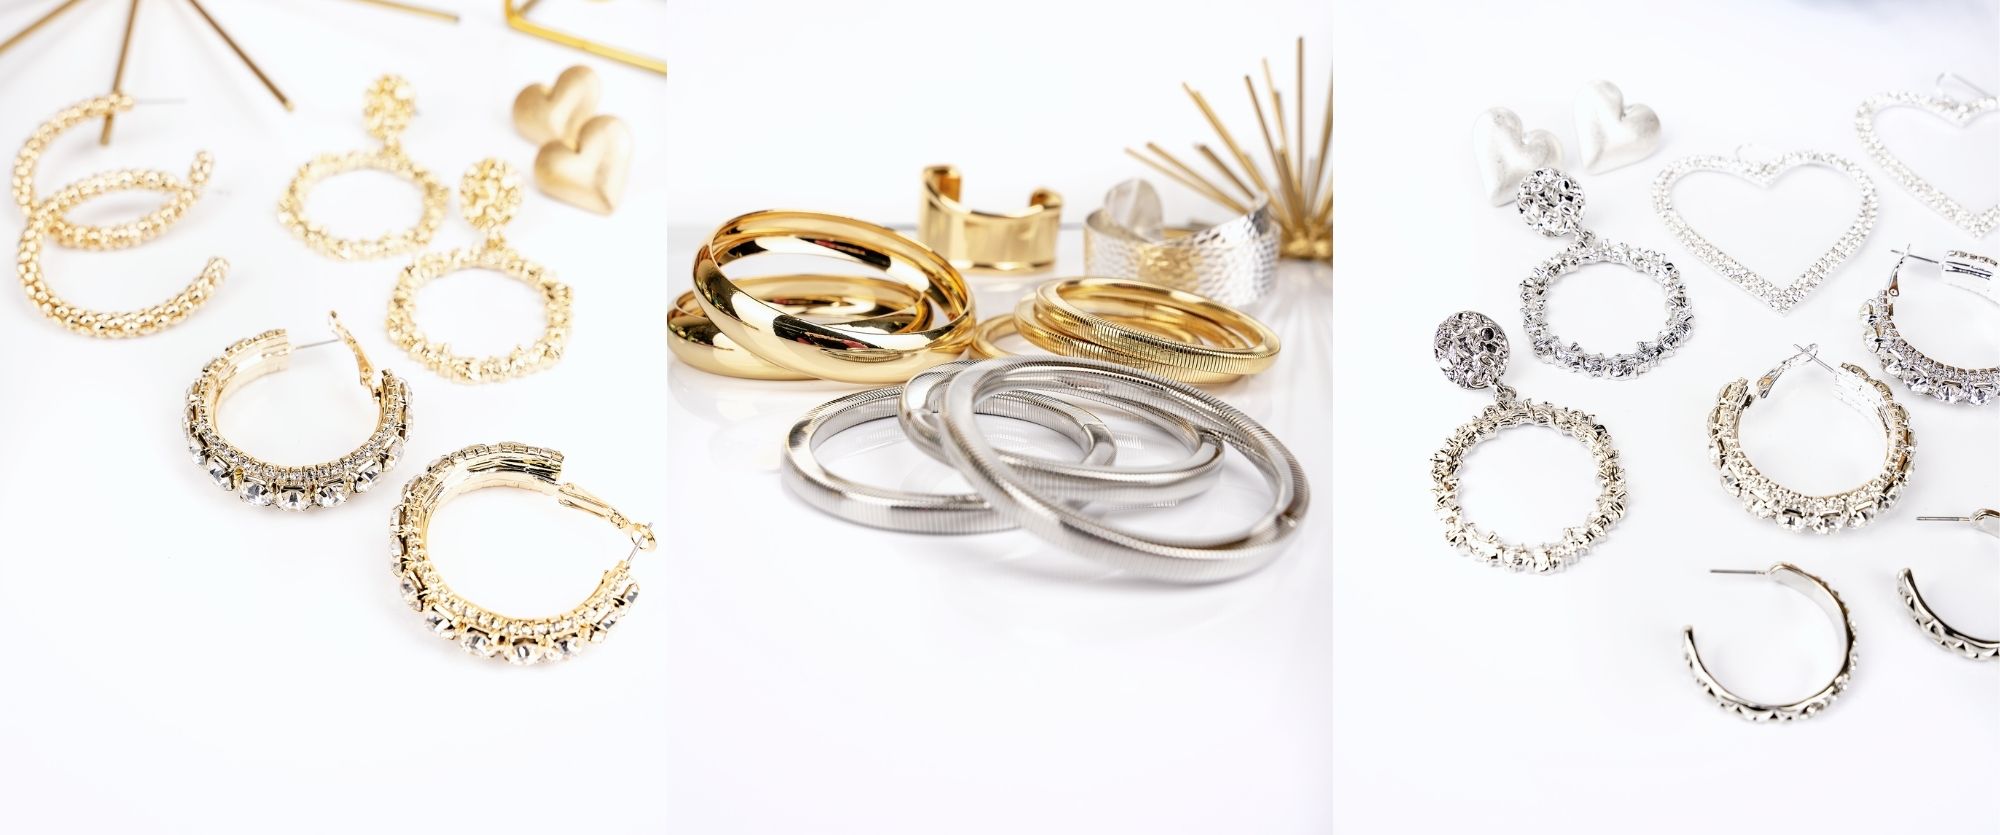 Wholesale Jewelry  Shop for Fashion Jewelry Wholesale With Free Shipping  on Wholesale Jewelry Accessories for Your Boutique Store - Wholesale  Accessory Market